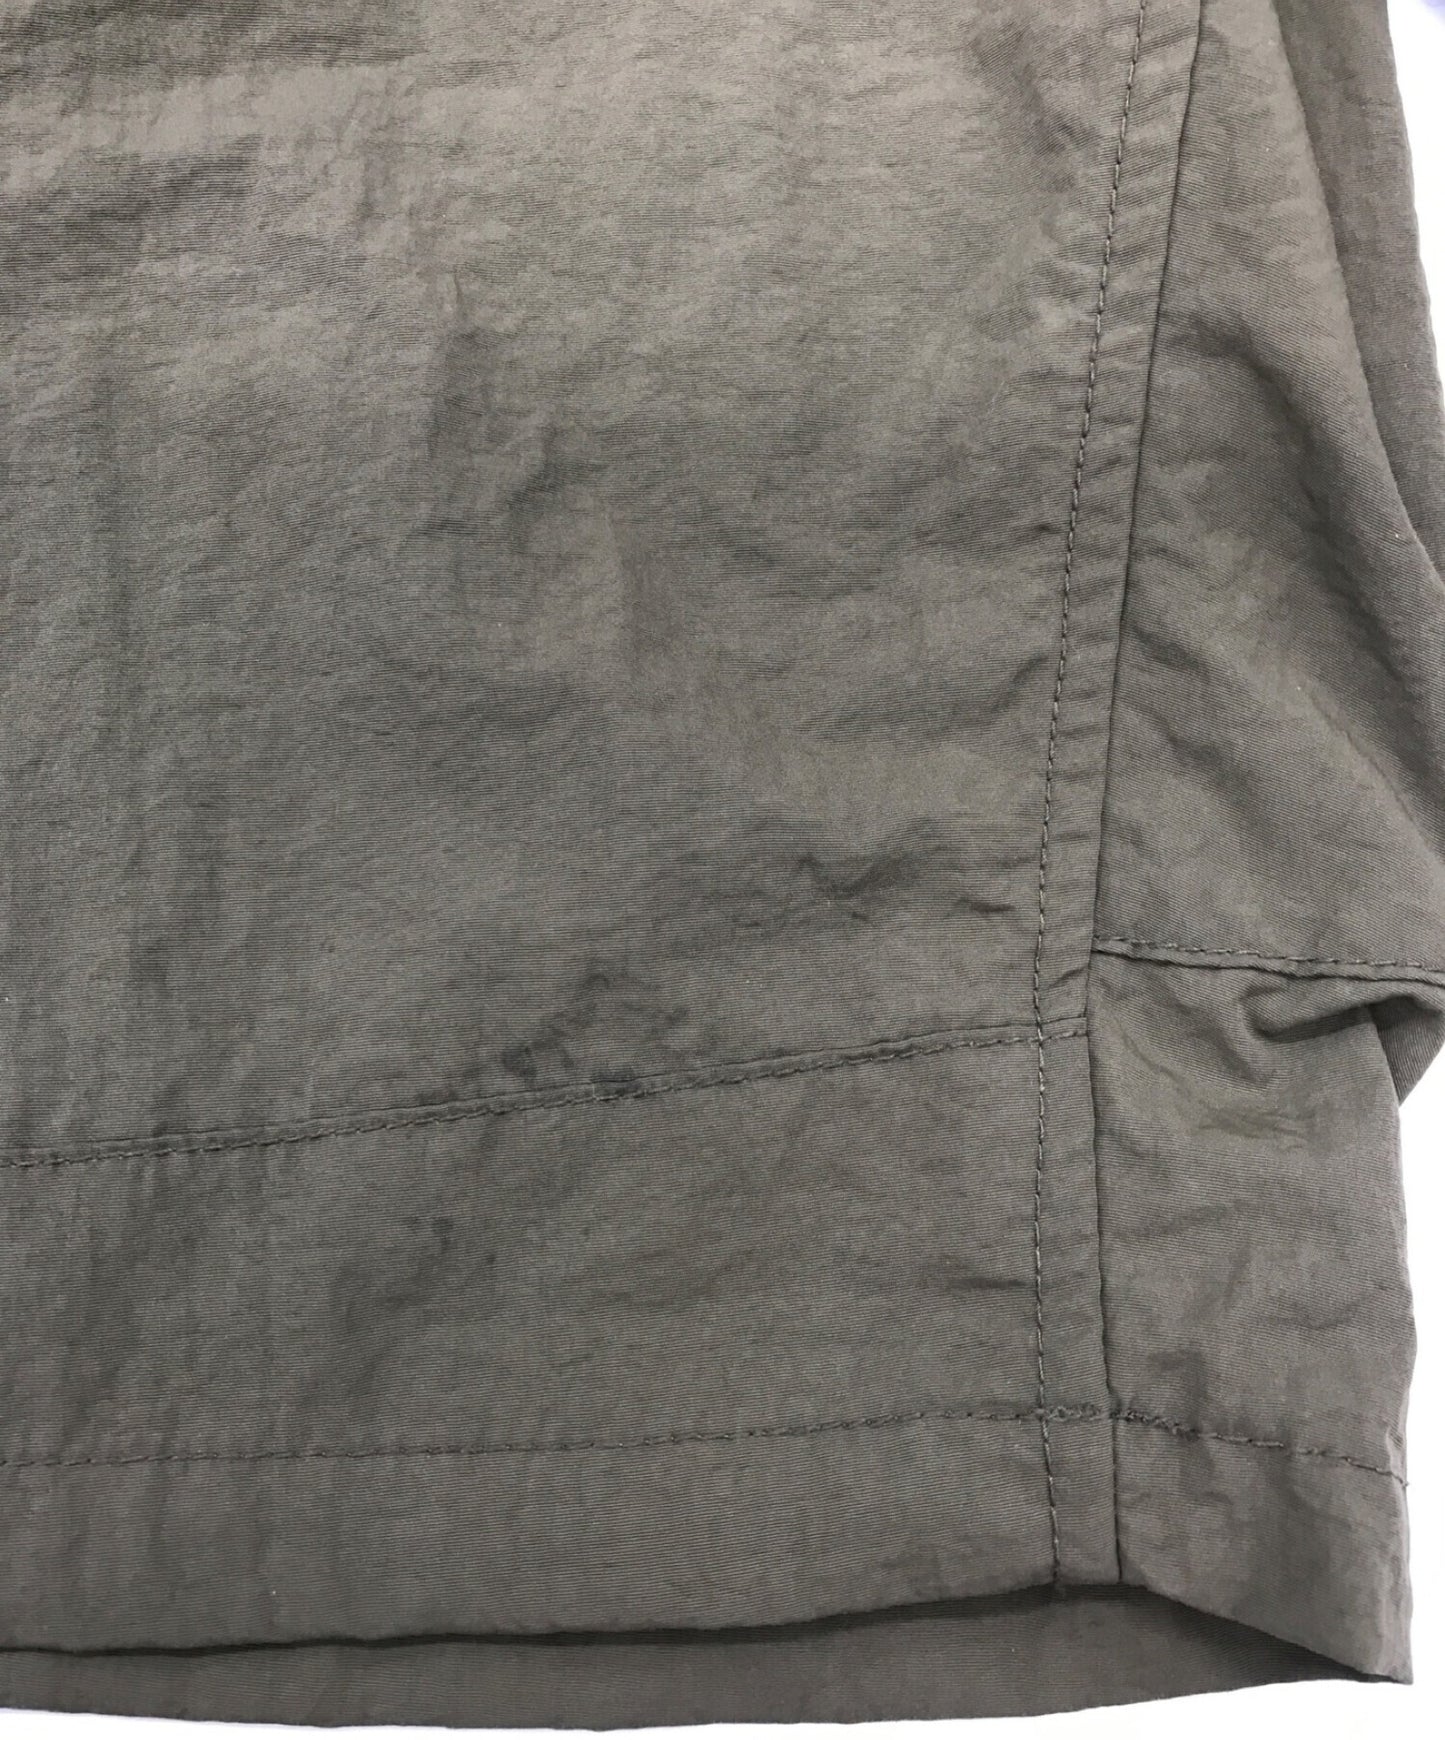 [Pre-owned] HUMAN MADE NYLON MILITARY SHORTS HM23PT014